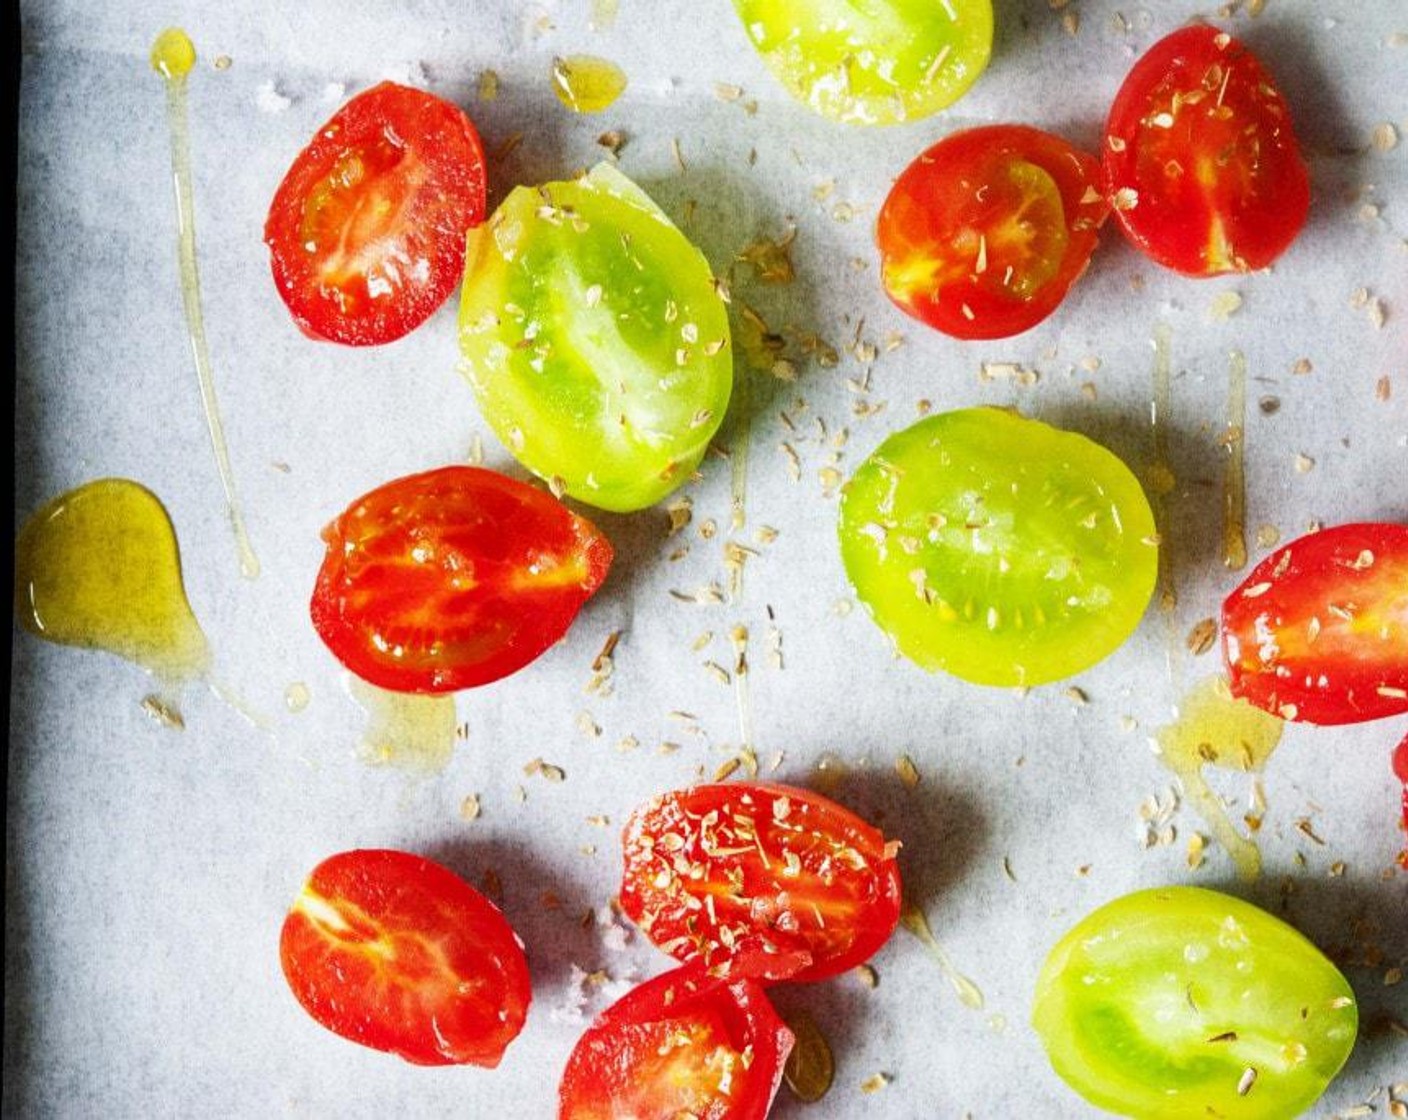 step 2 Start off by preparing the confit Cherry Tomatoes (2 cups). Slice up in half the red and green cherry tomatoes. Place them side up on a baking tray. sprinkle with Salt (to taste), Granulated Sugar (1 Tbsp), Fresh Oregano (1 Tbsp), and 1 tablespoon of the Olive Oil (1 Tbsp).